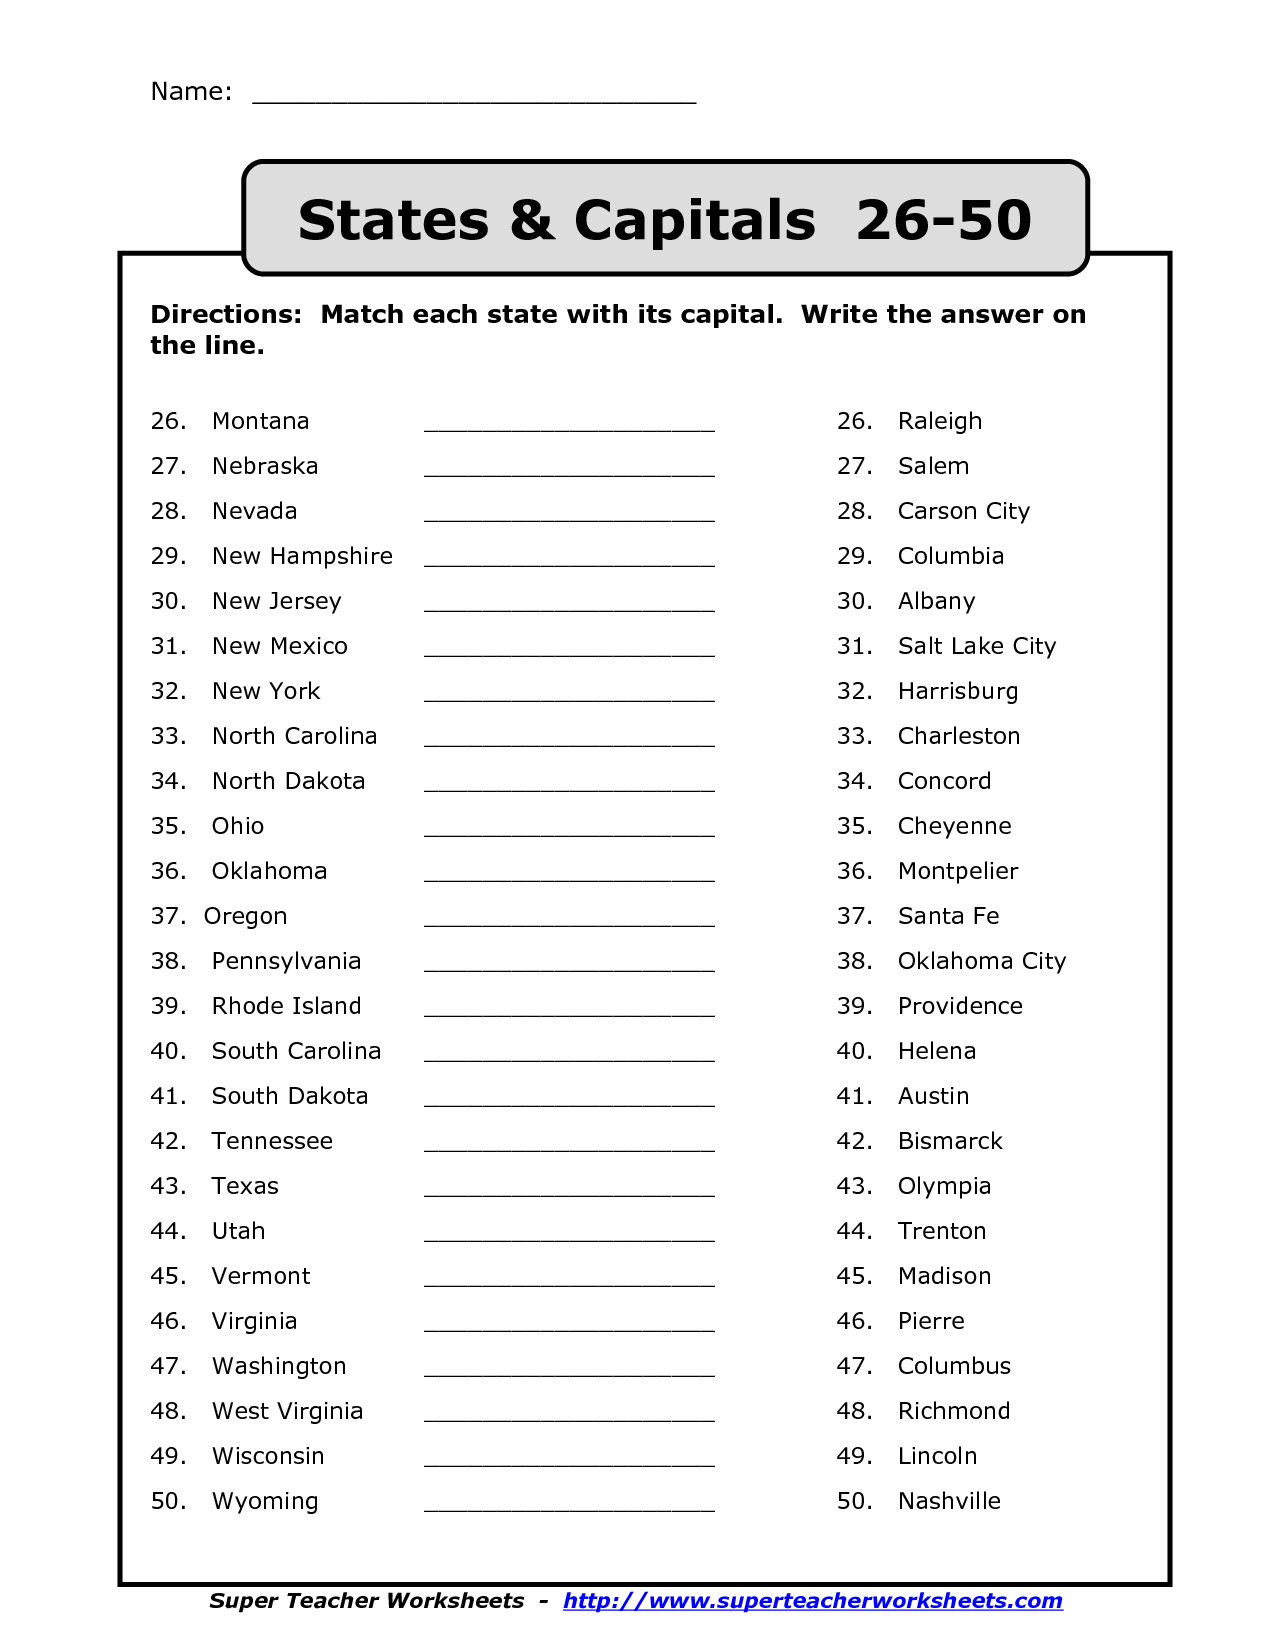 free-printable-states-and-capitals-worksheets